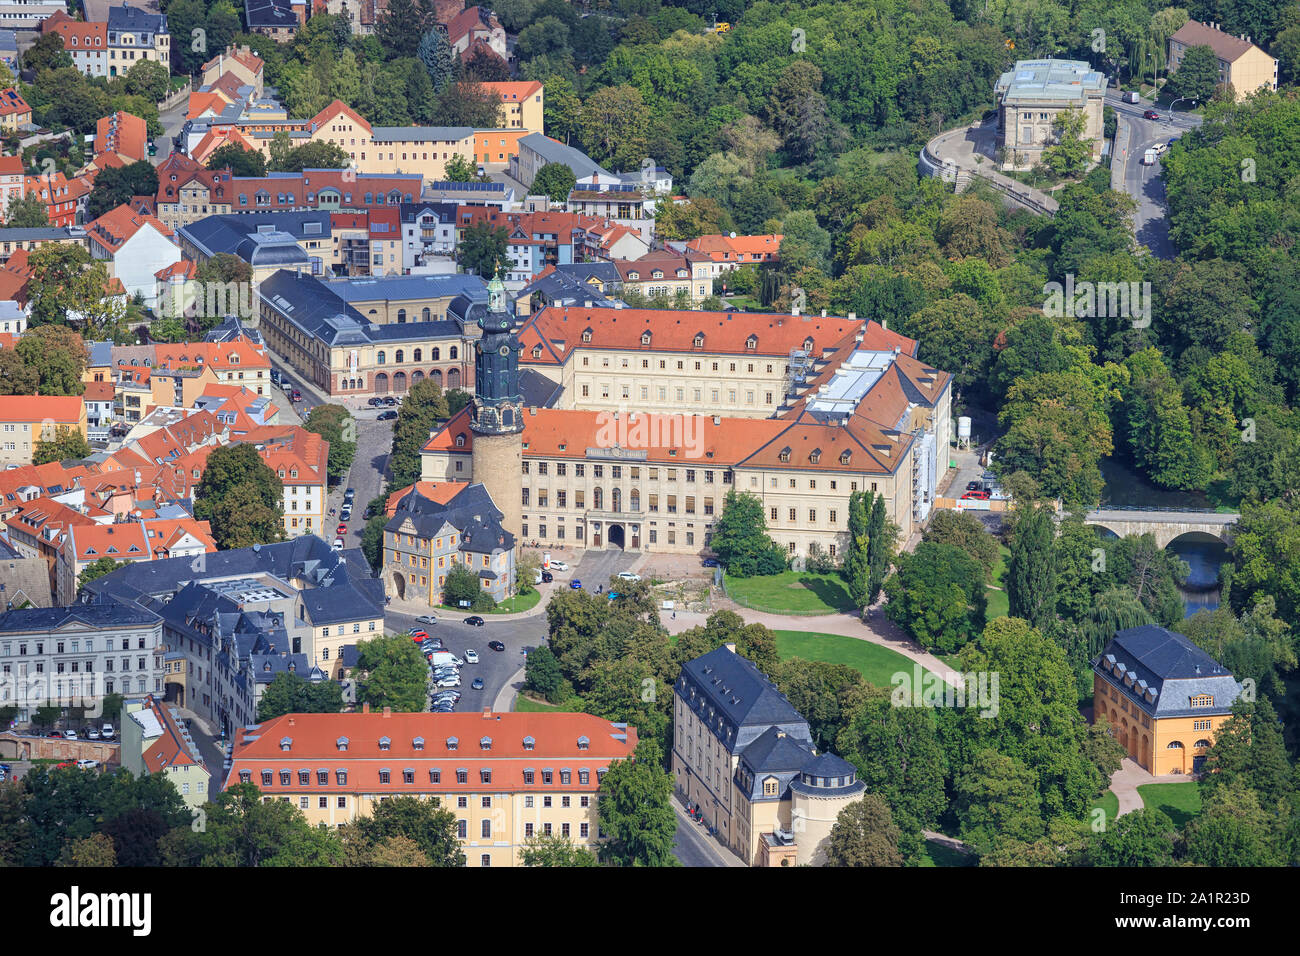 The castle in the historical centre of Weimar in Germany Stock Photo